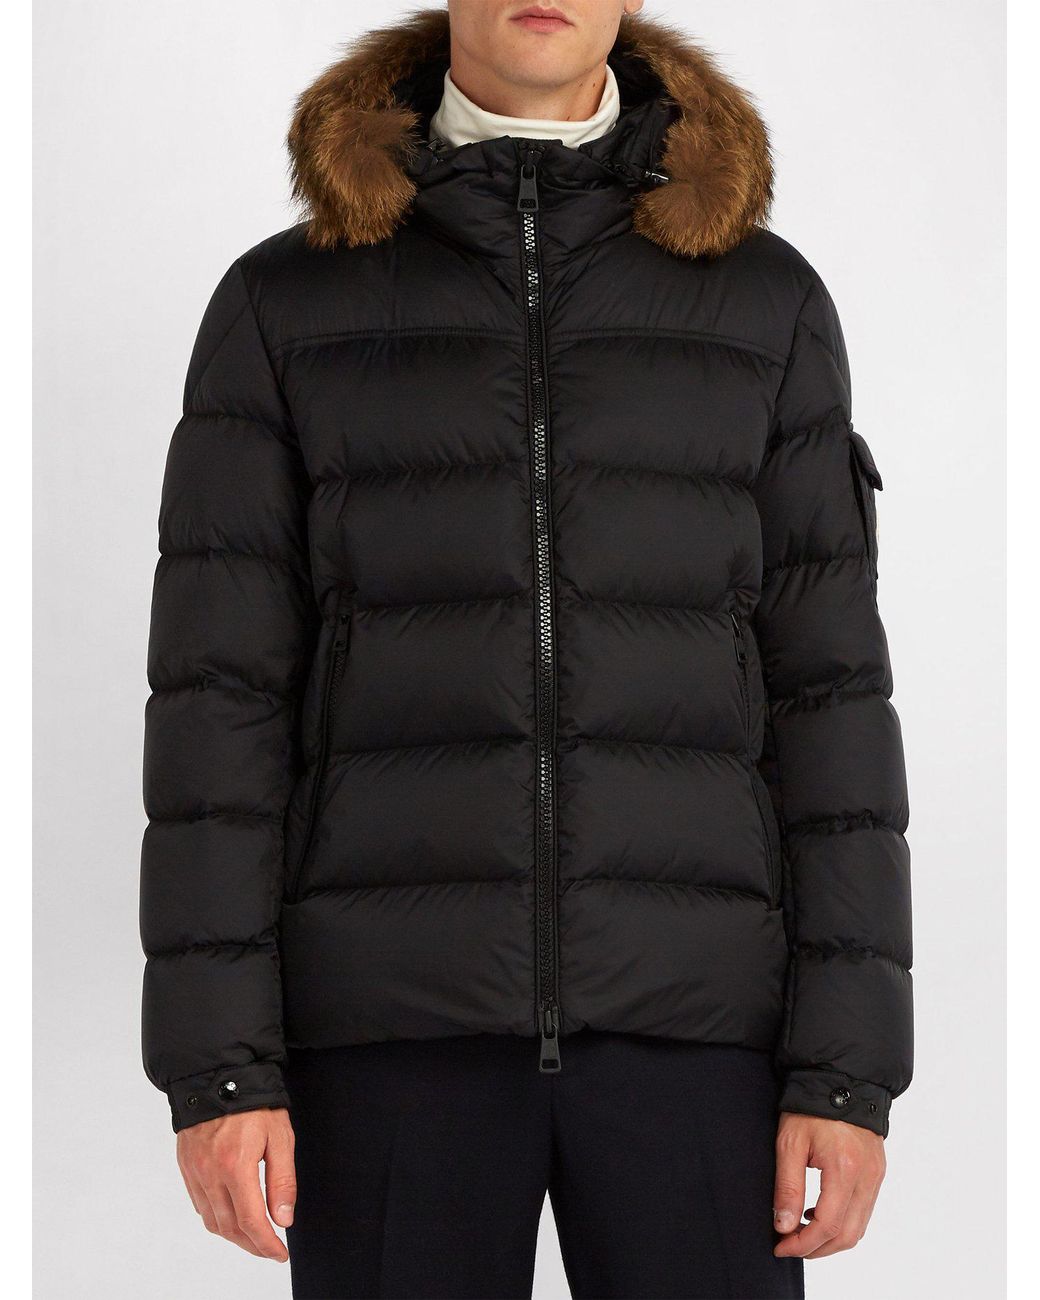 Moncler Synthetic Marque Quilted-down Jacket in Black for Men | Lyst